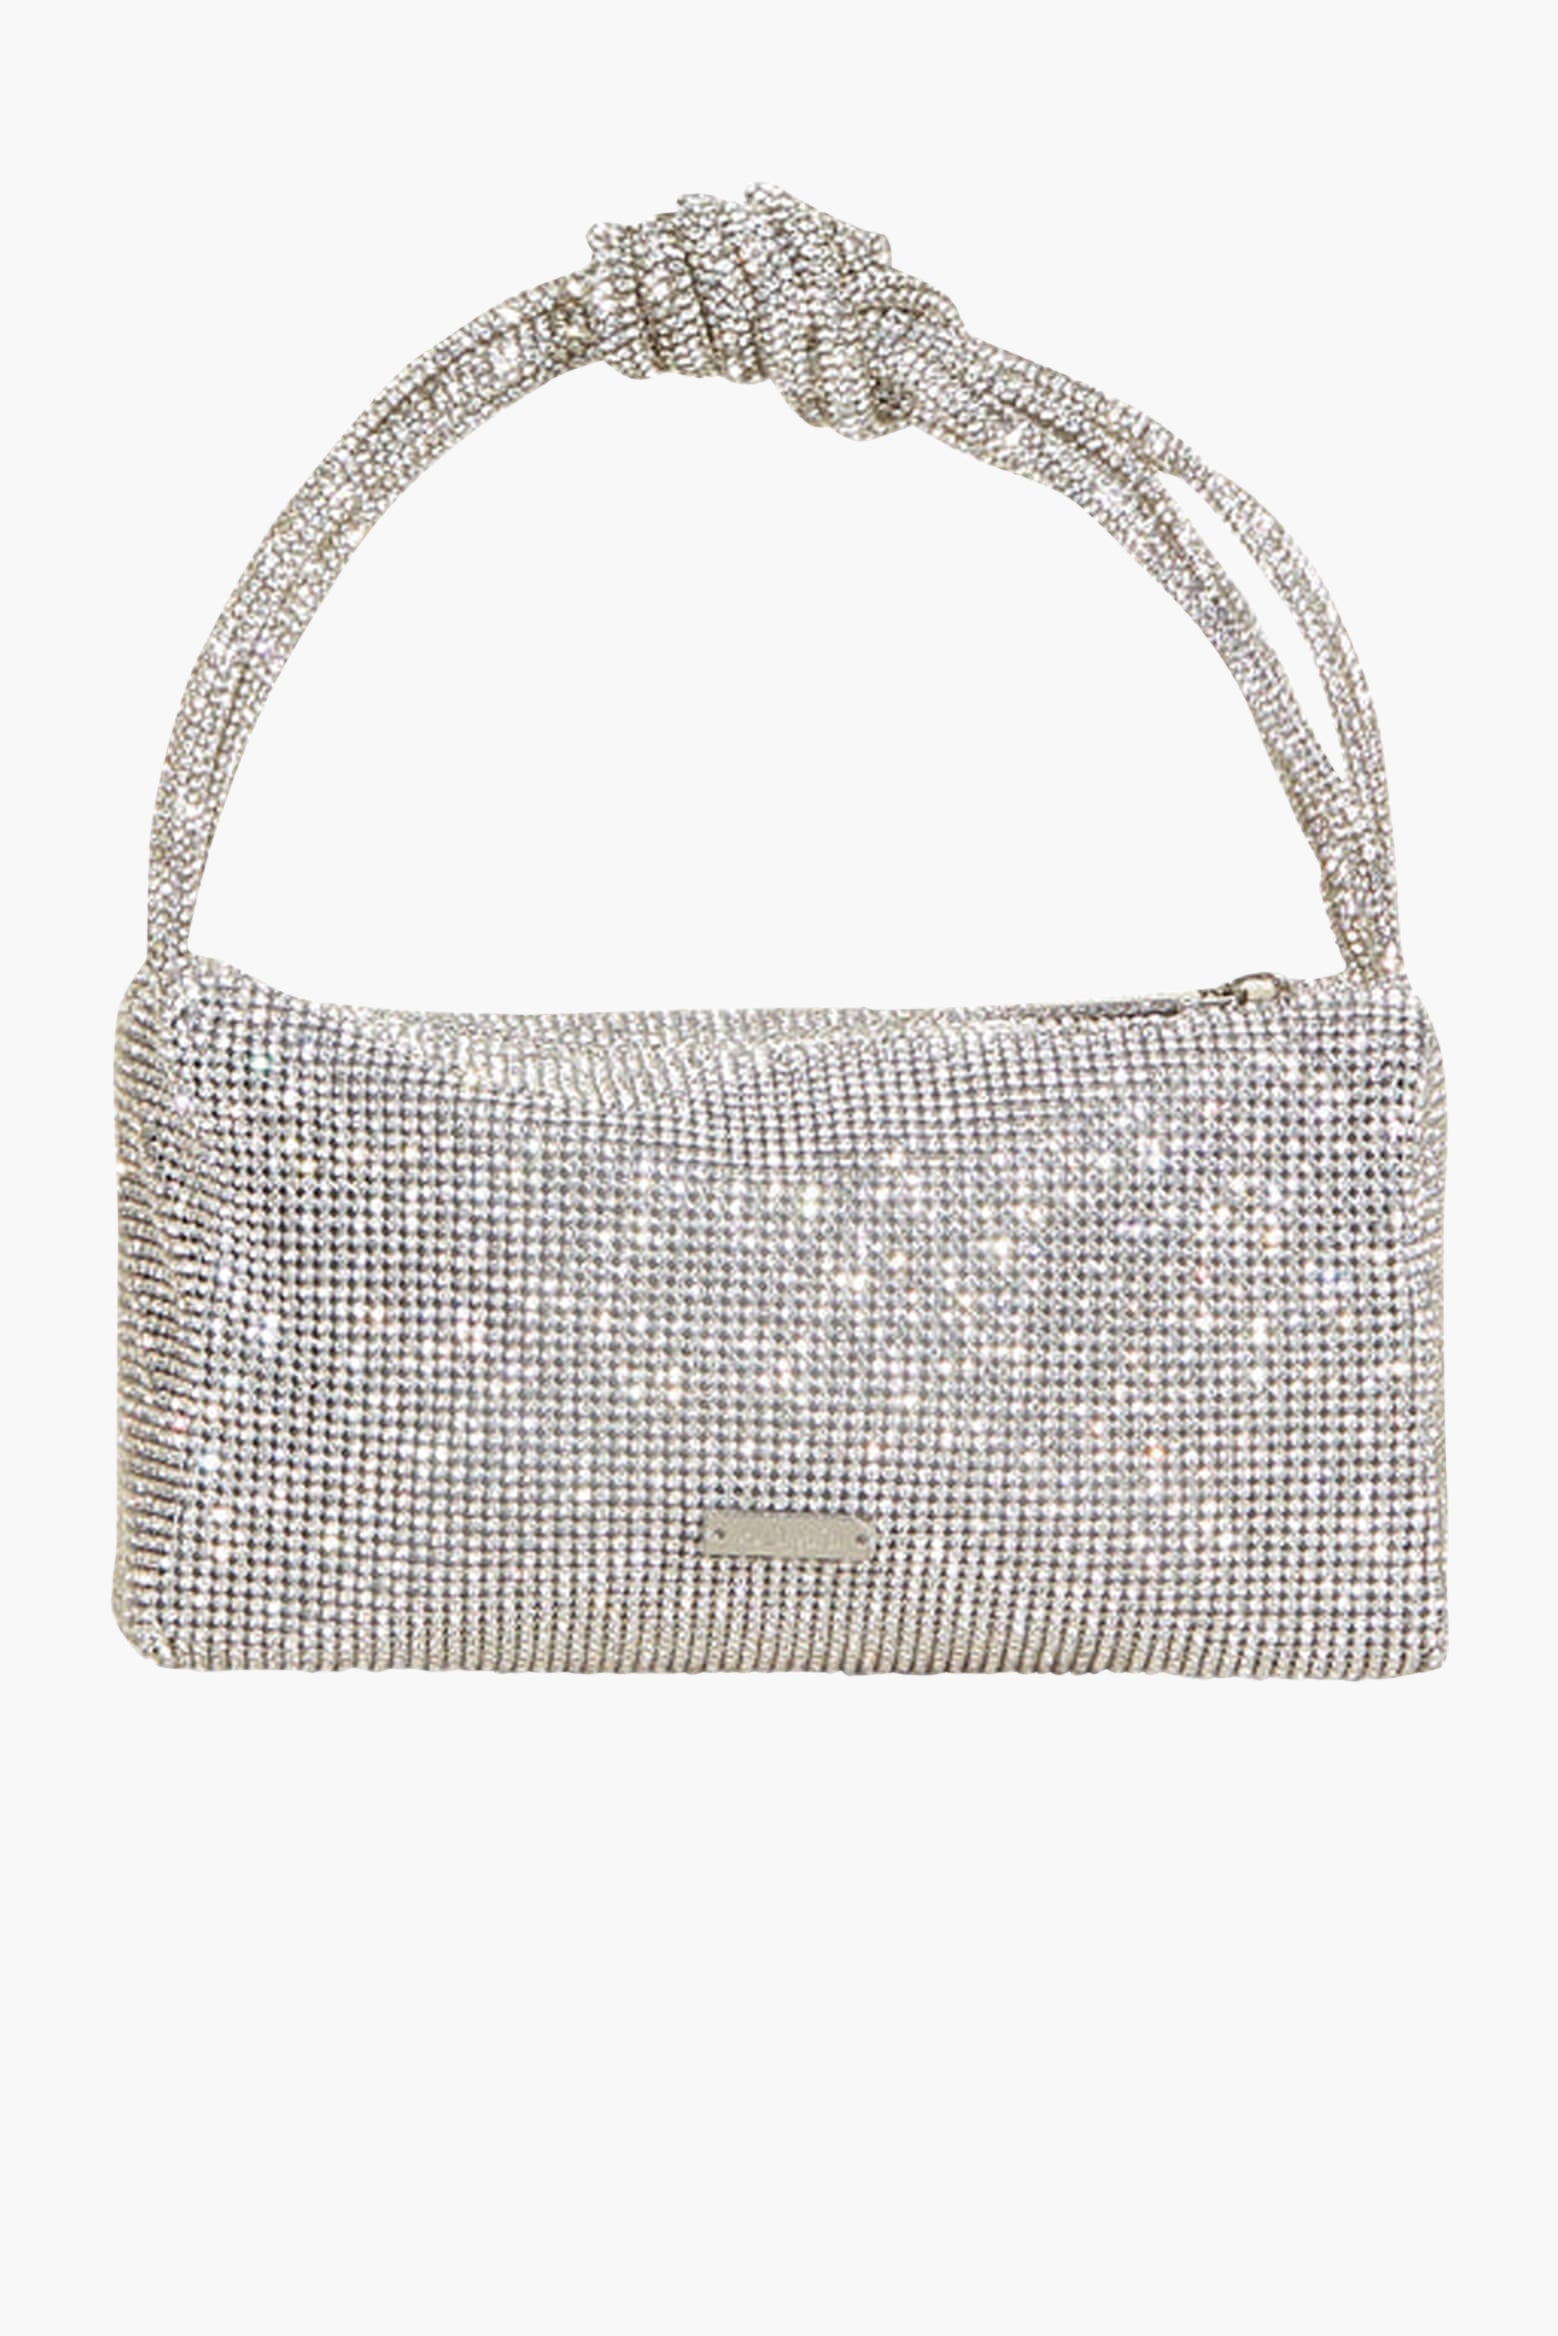 Cult Gaia Sienna Mini Top Handle Bag in Clear available at TNT The New Trend Australia.